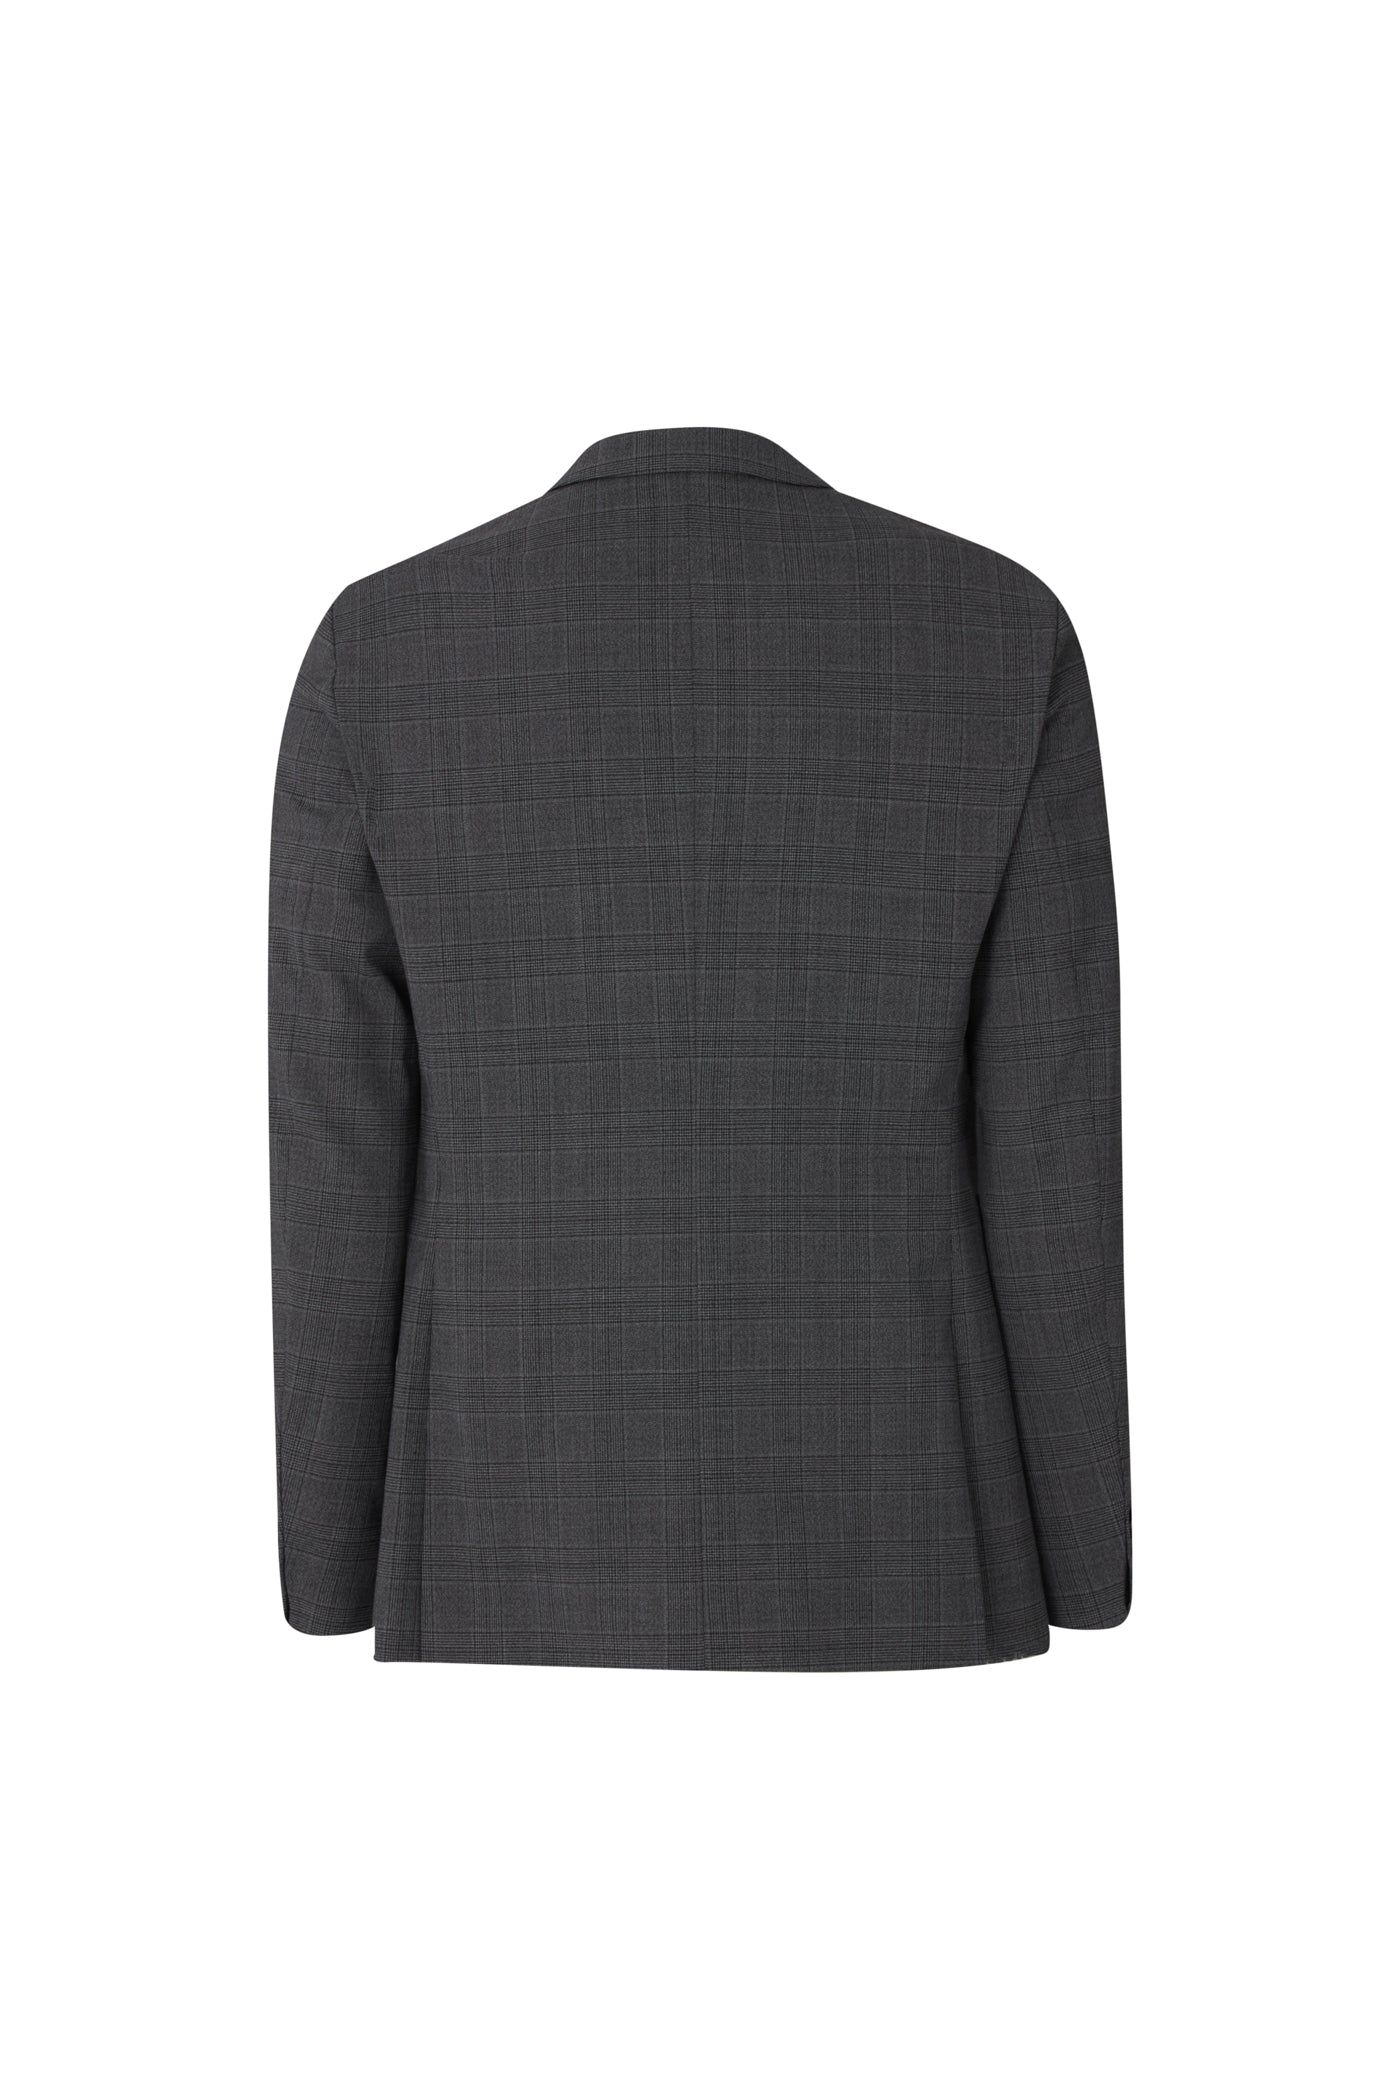 Ace wool check jacket